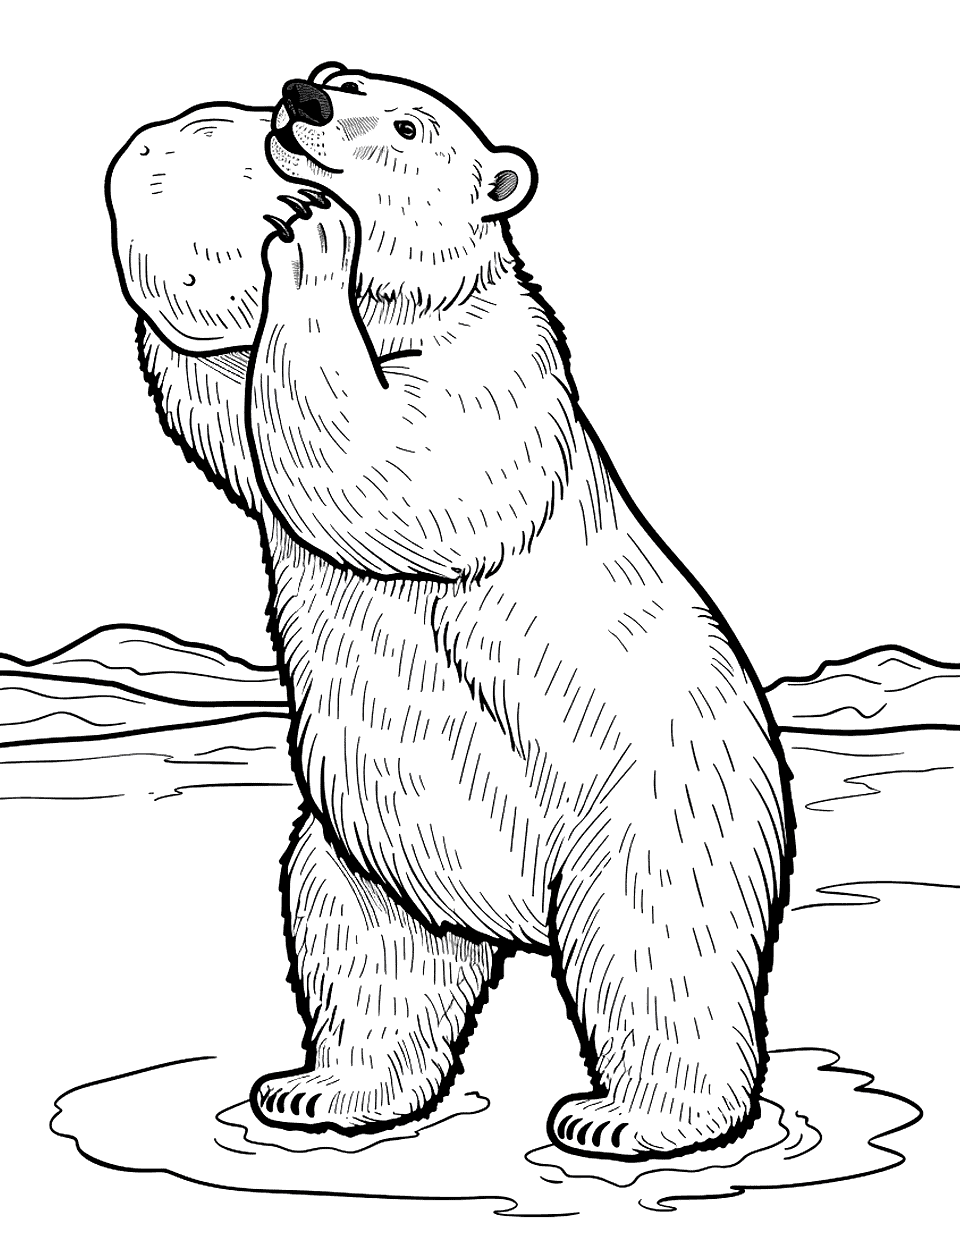 Snowball-Playing Polar Bear Coloring Page - A polar bear throwing a large snowball with its paws.